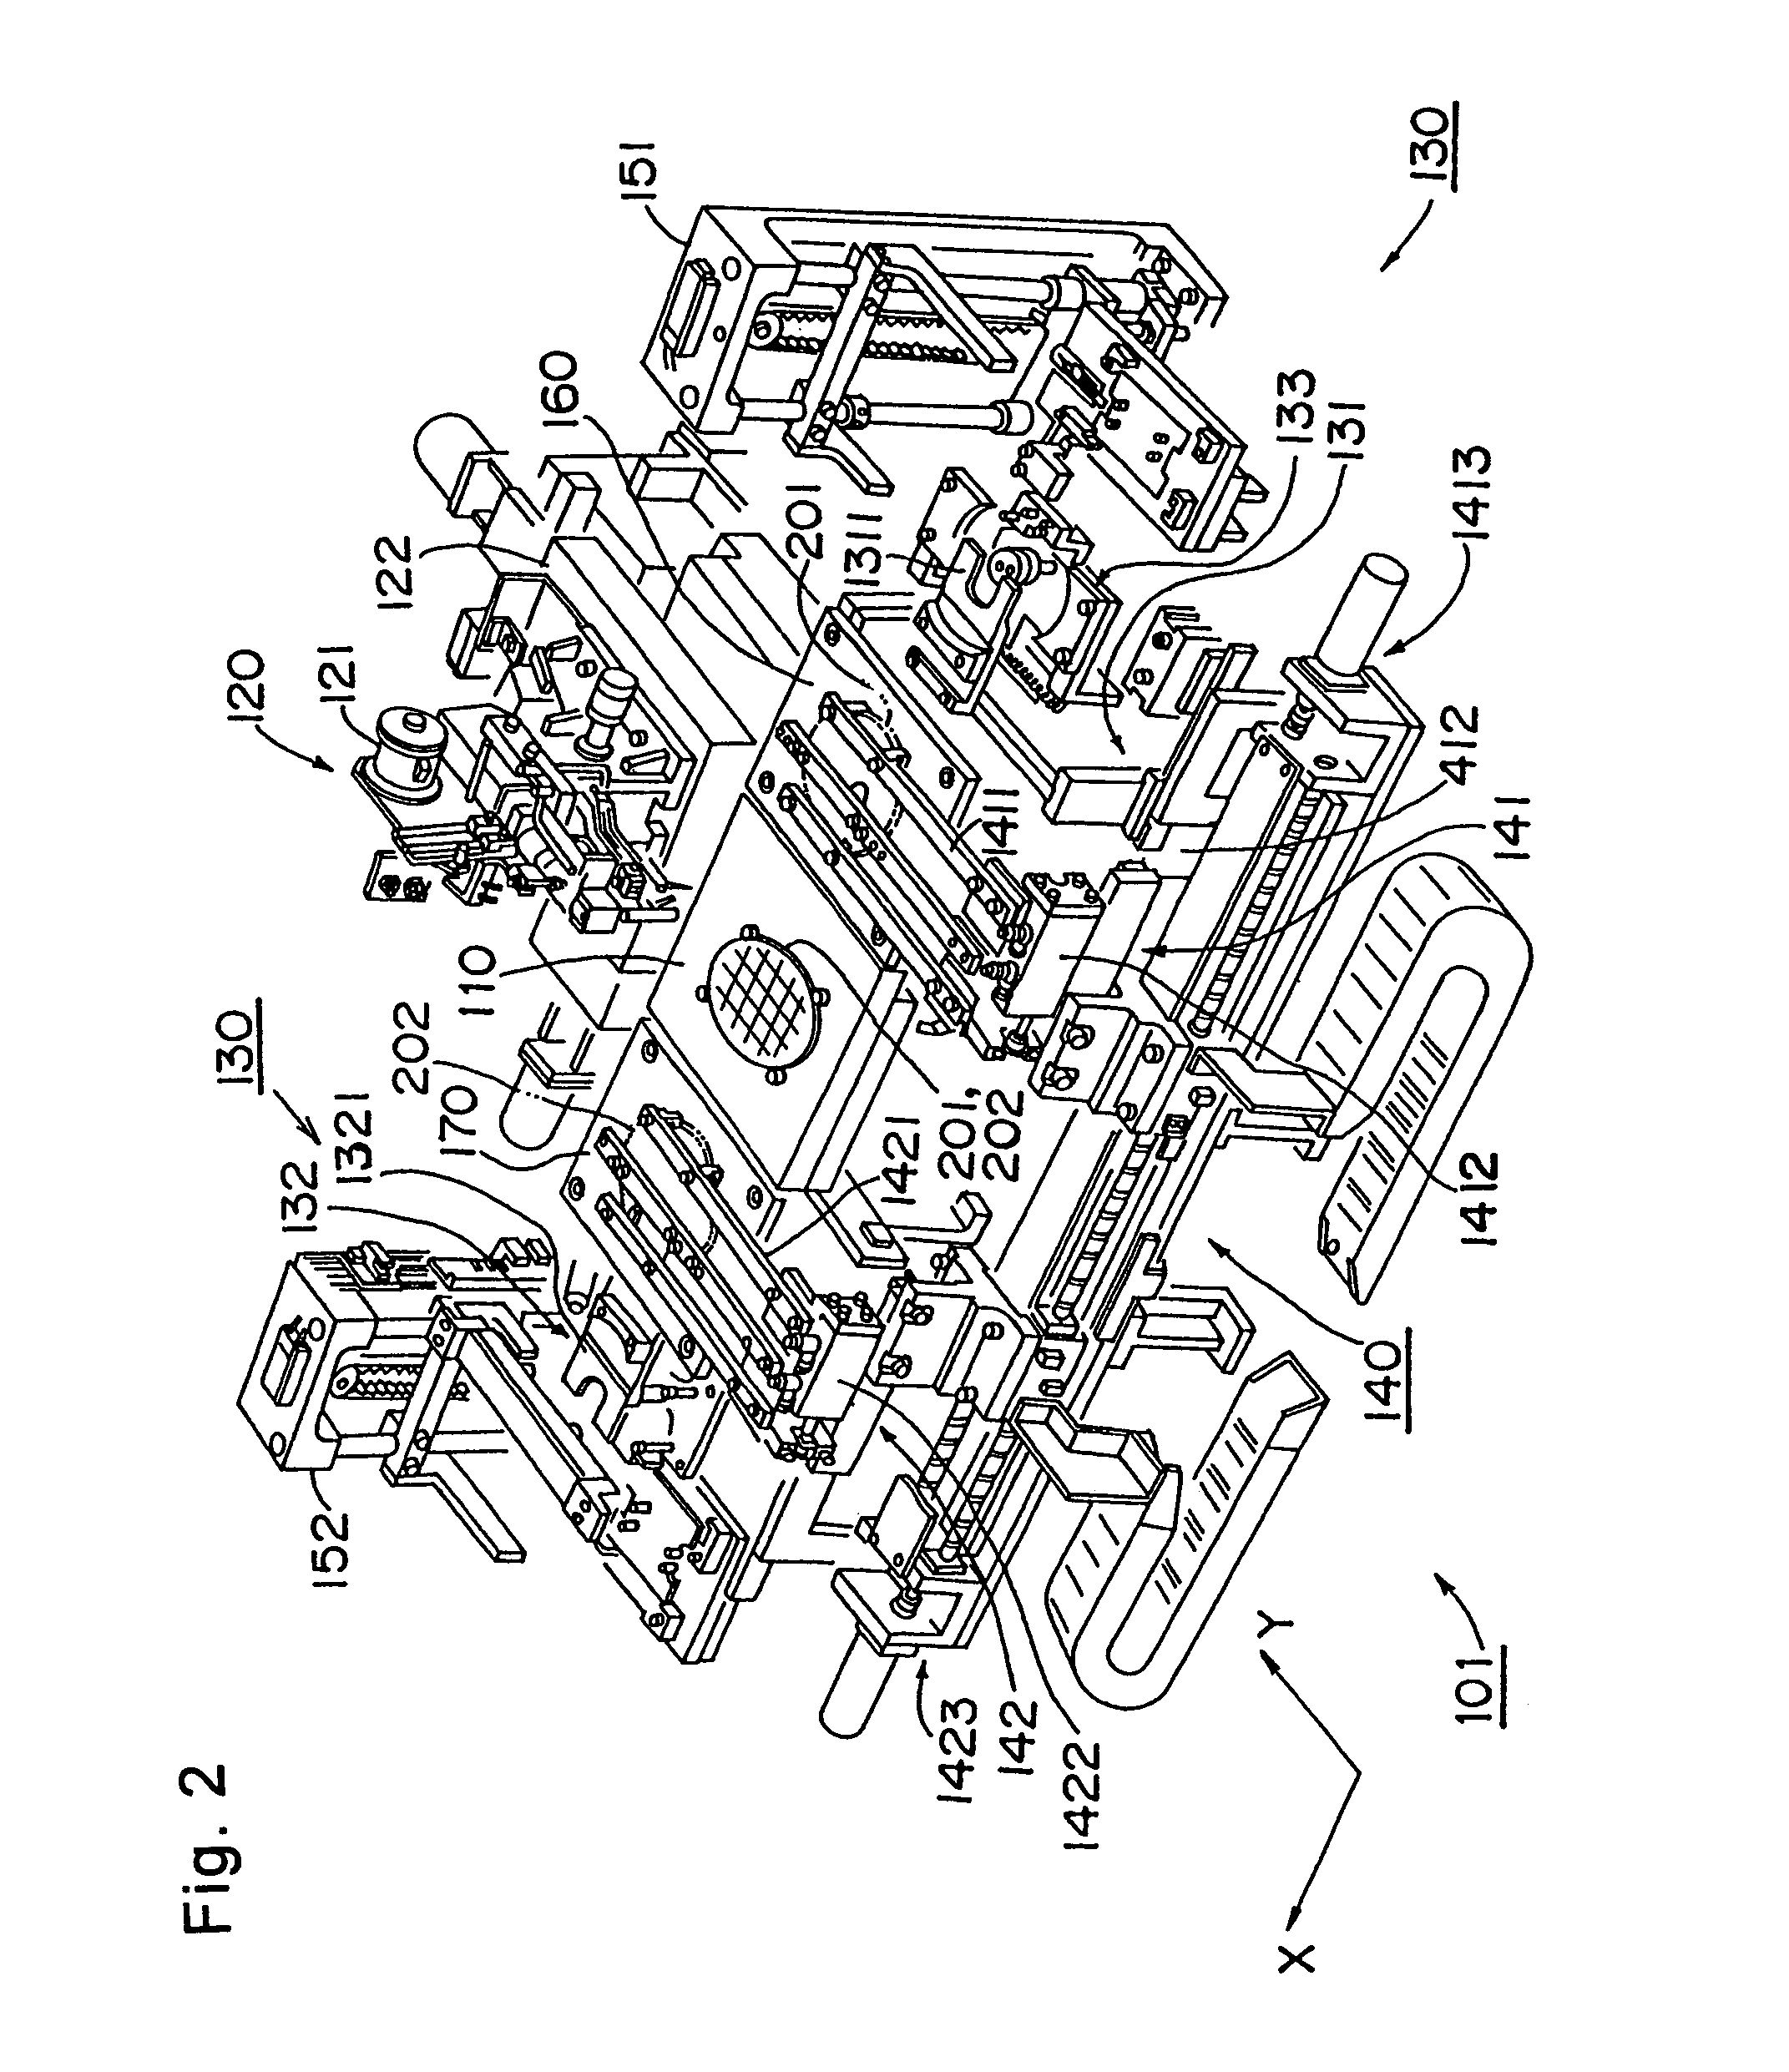 Bump forming apparatus for charge appearance semiconductor substrate, charge removal method for charge appearance semiconductor substrate, charge removing unit for charge appearance semiconductor substrate, and charge appearance semiconductor substrate